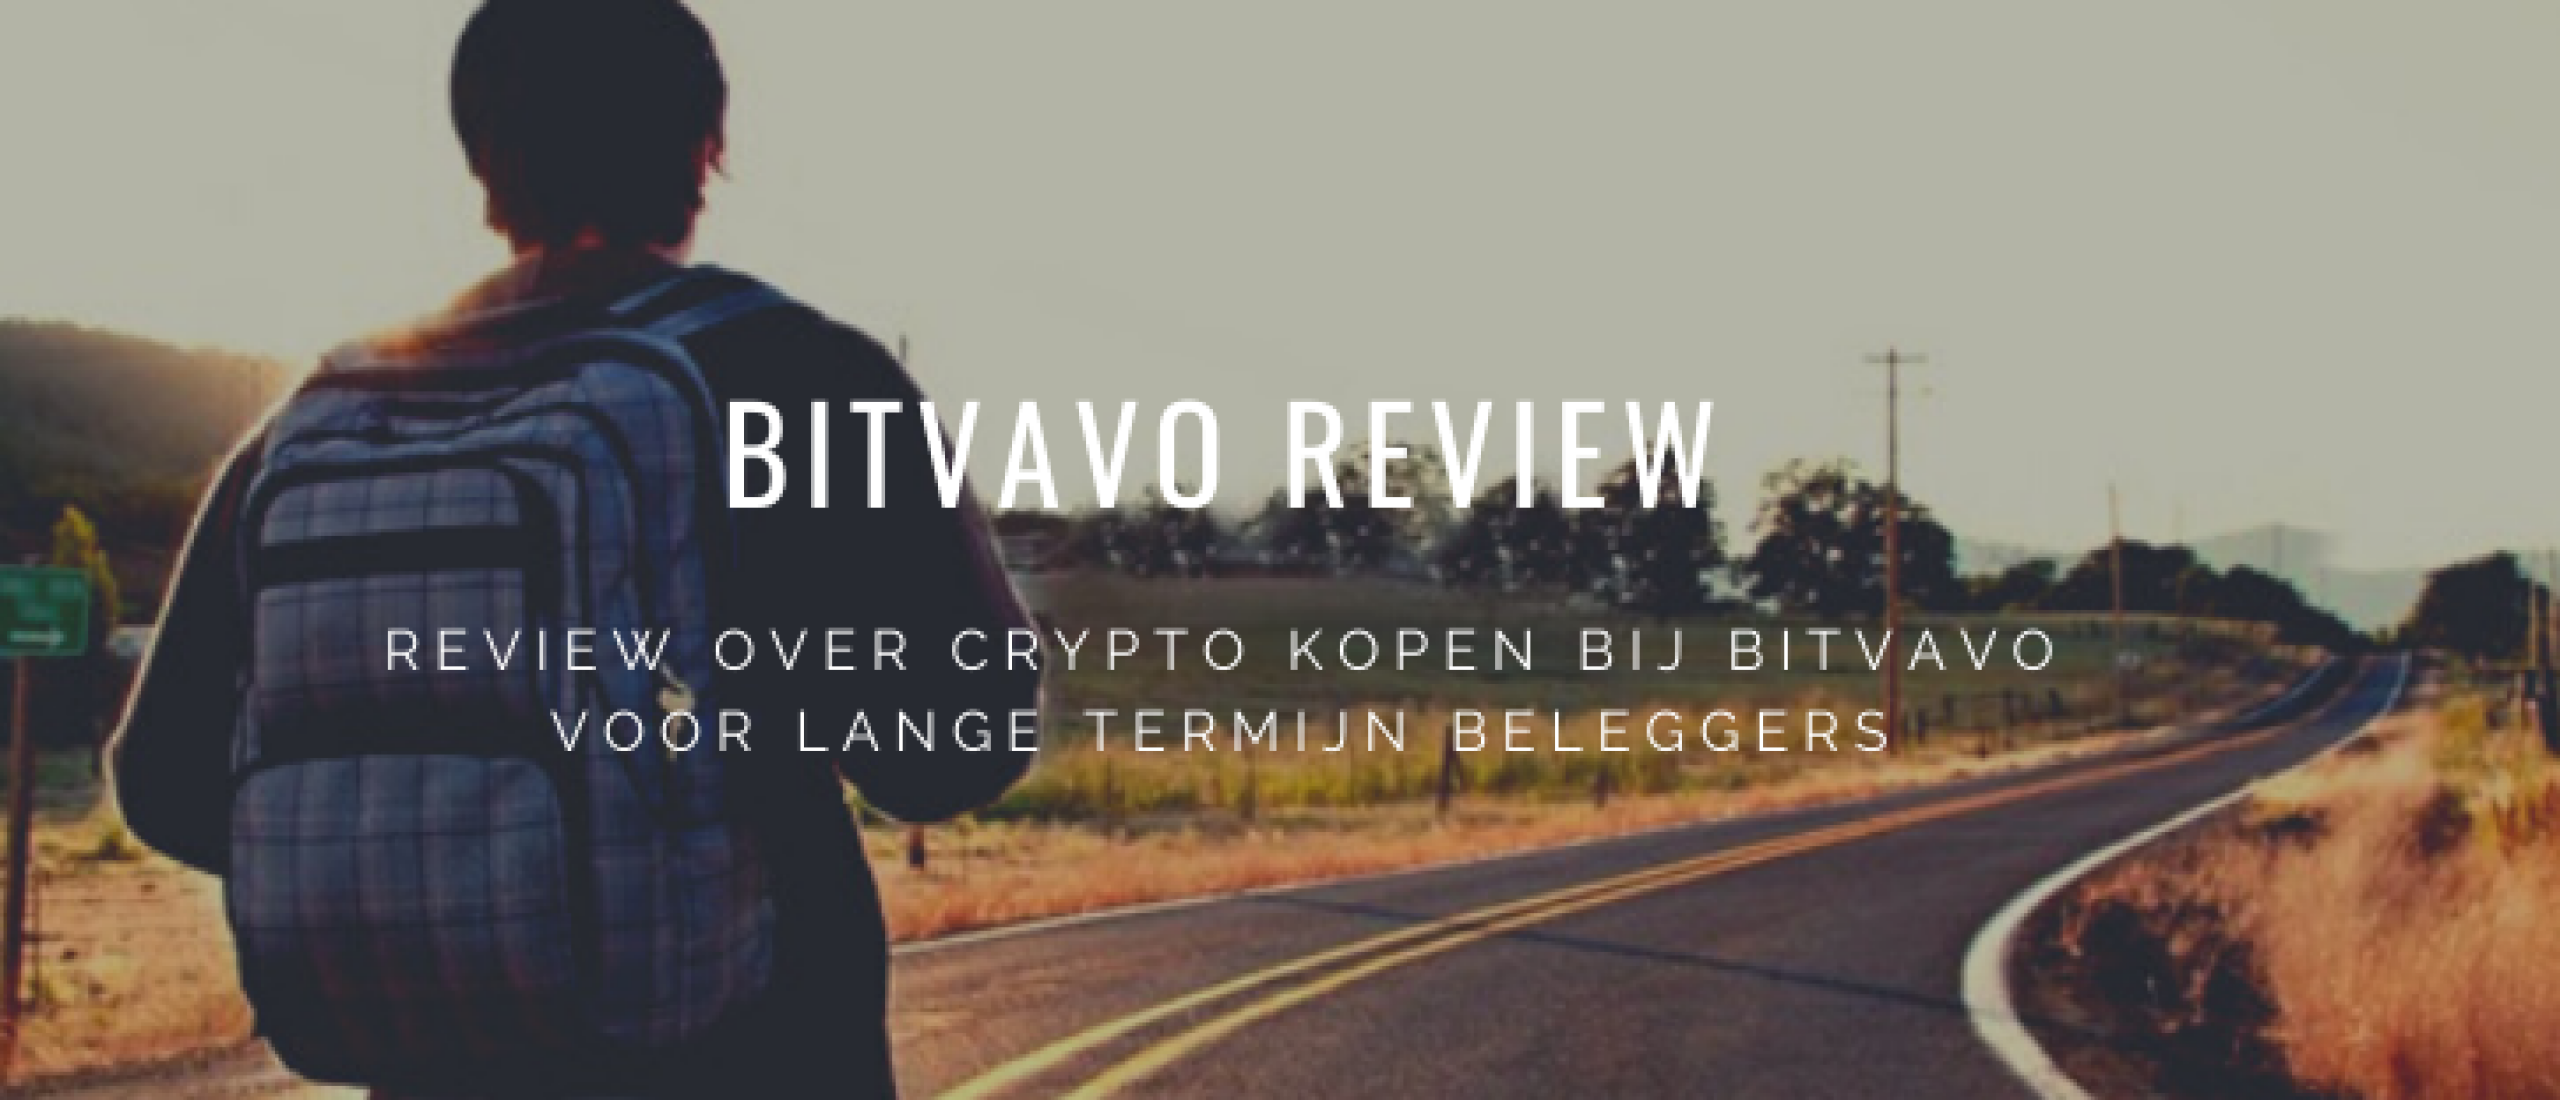 bitvavo-review